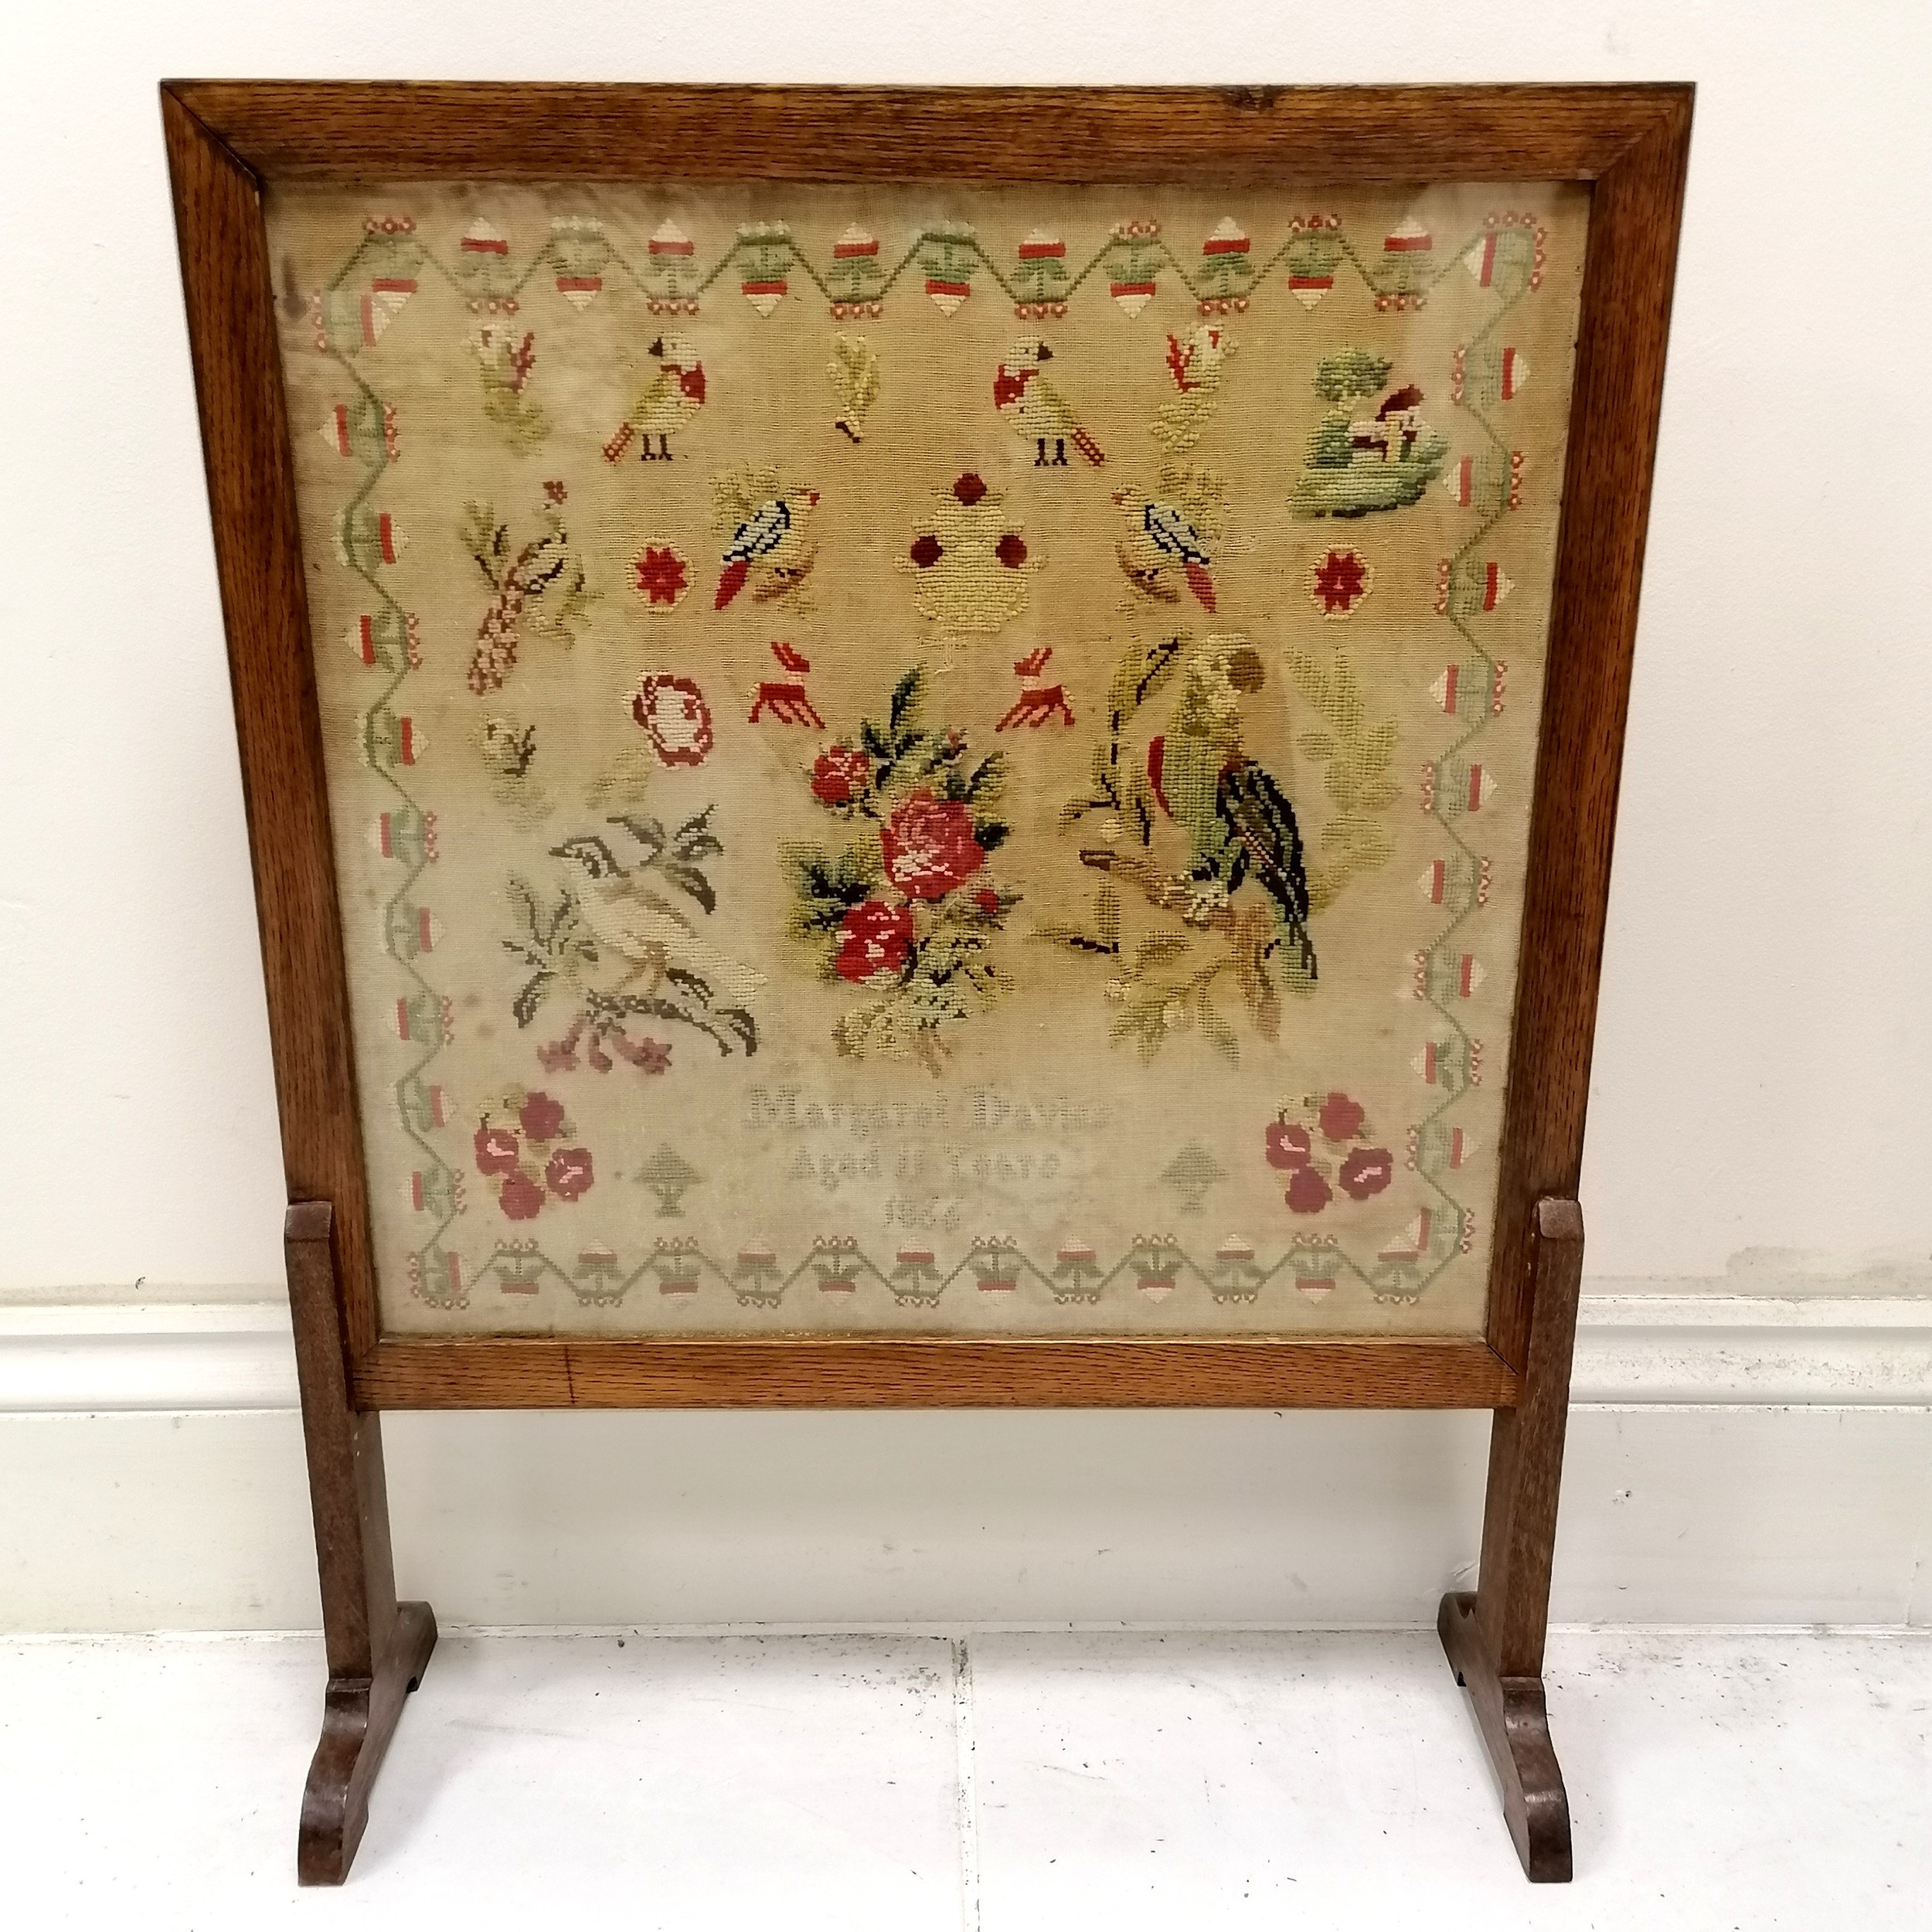 1866 tapestry sampler by Margaret Davies (aged 11) in a later firescreen stand - 72cm high x 55cm